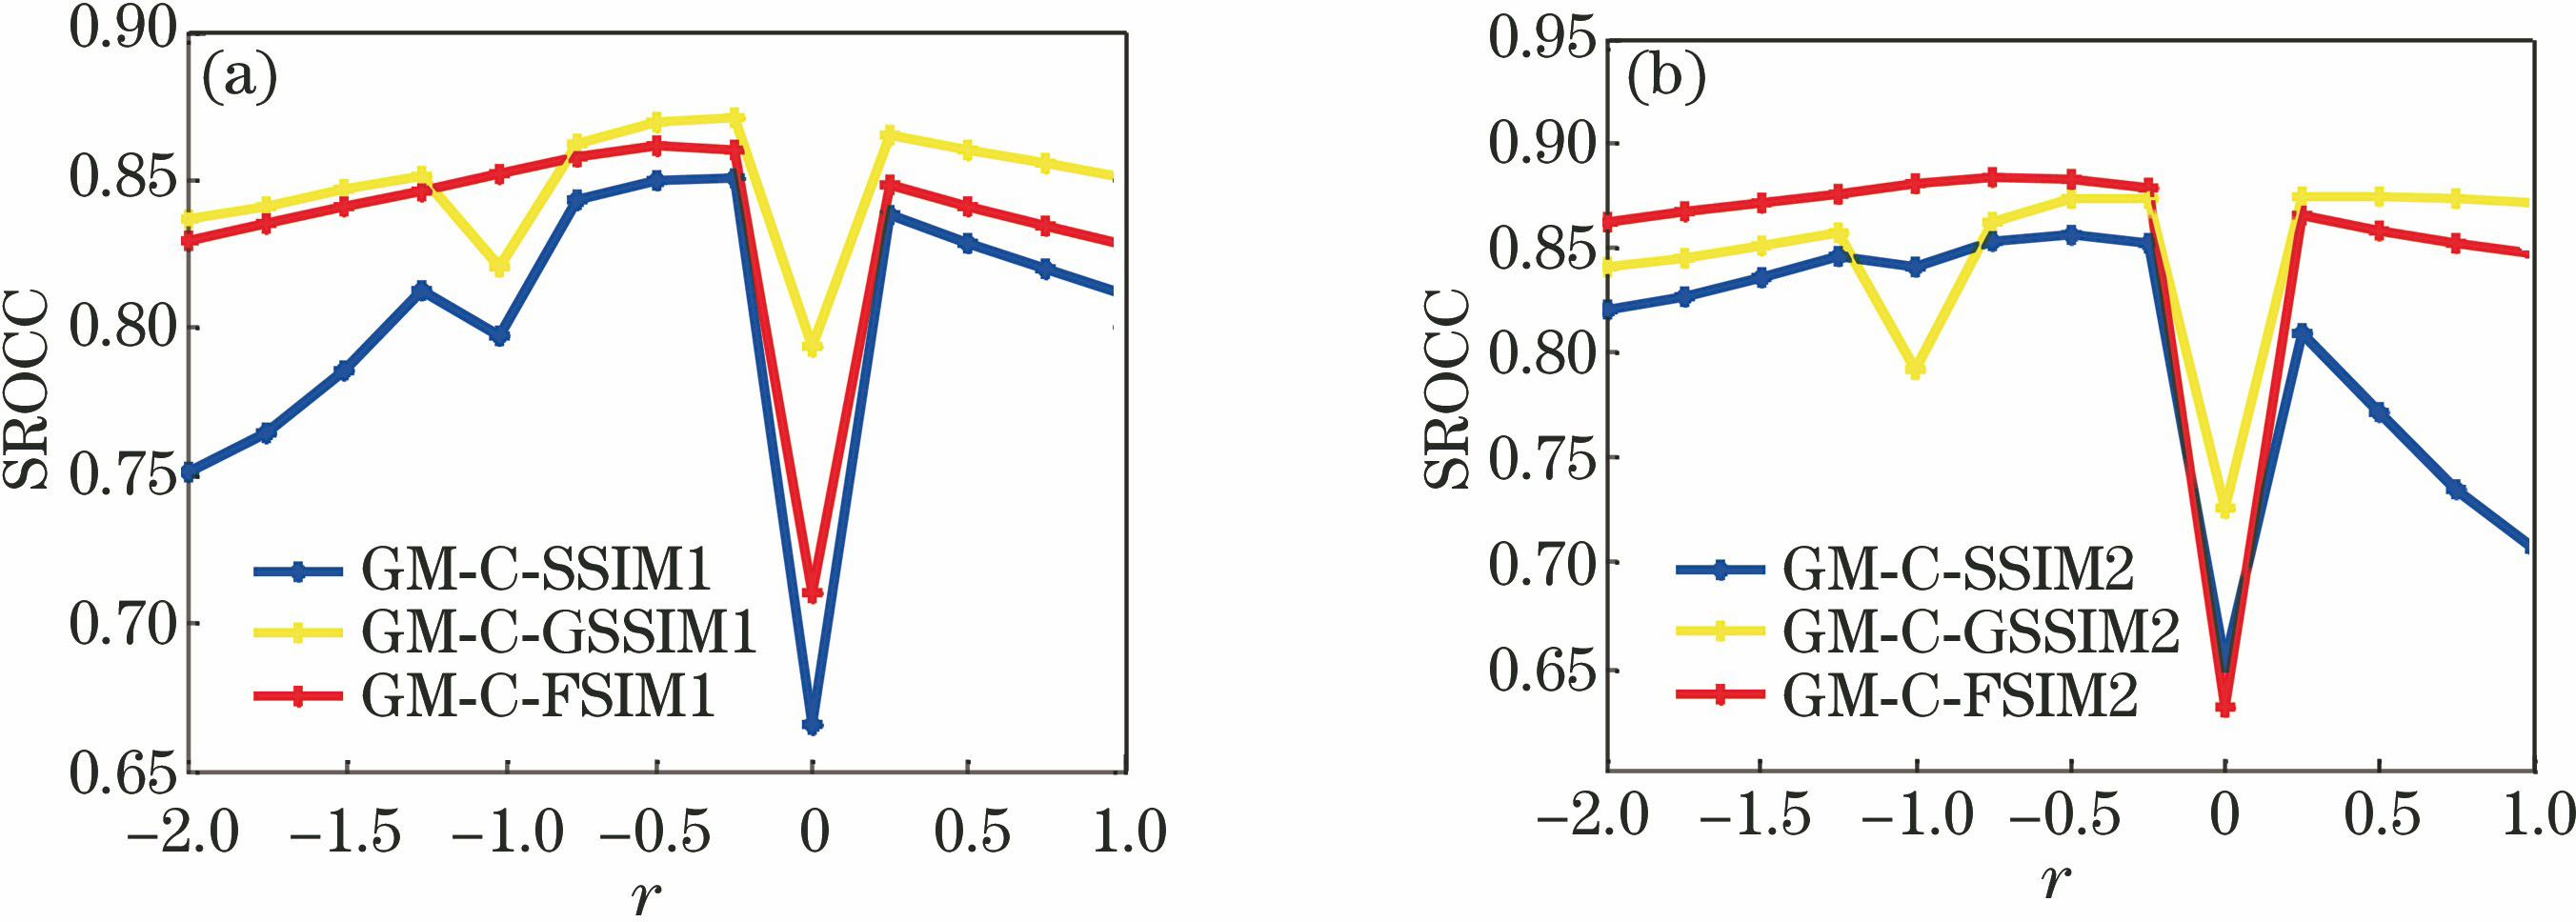 SROCC curves varying with r. (a) General mean pooling strategy 1; (b) general mean pooling strategy 2